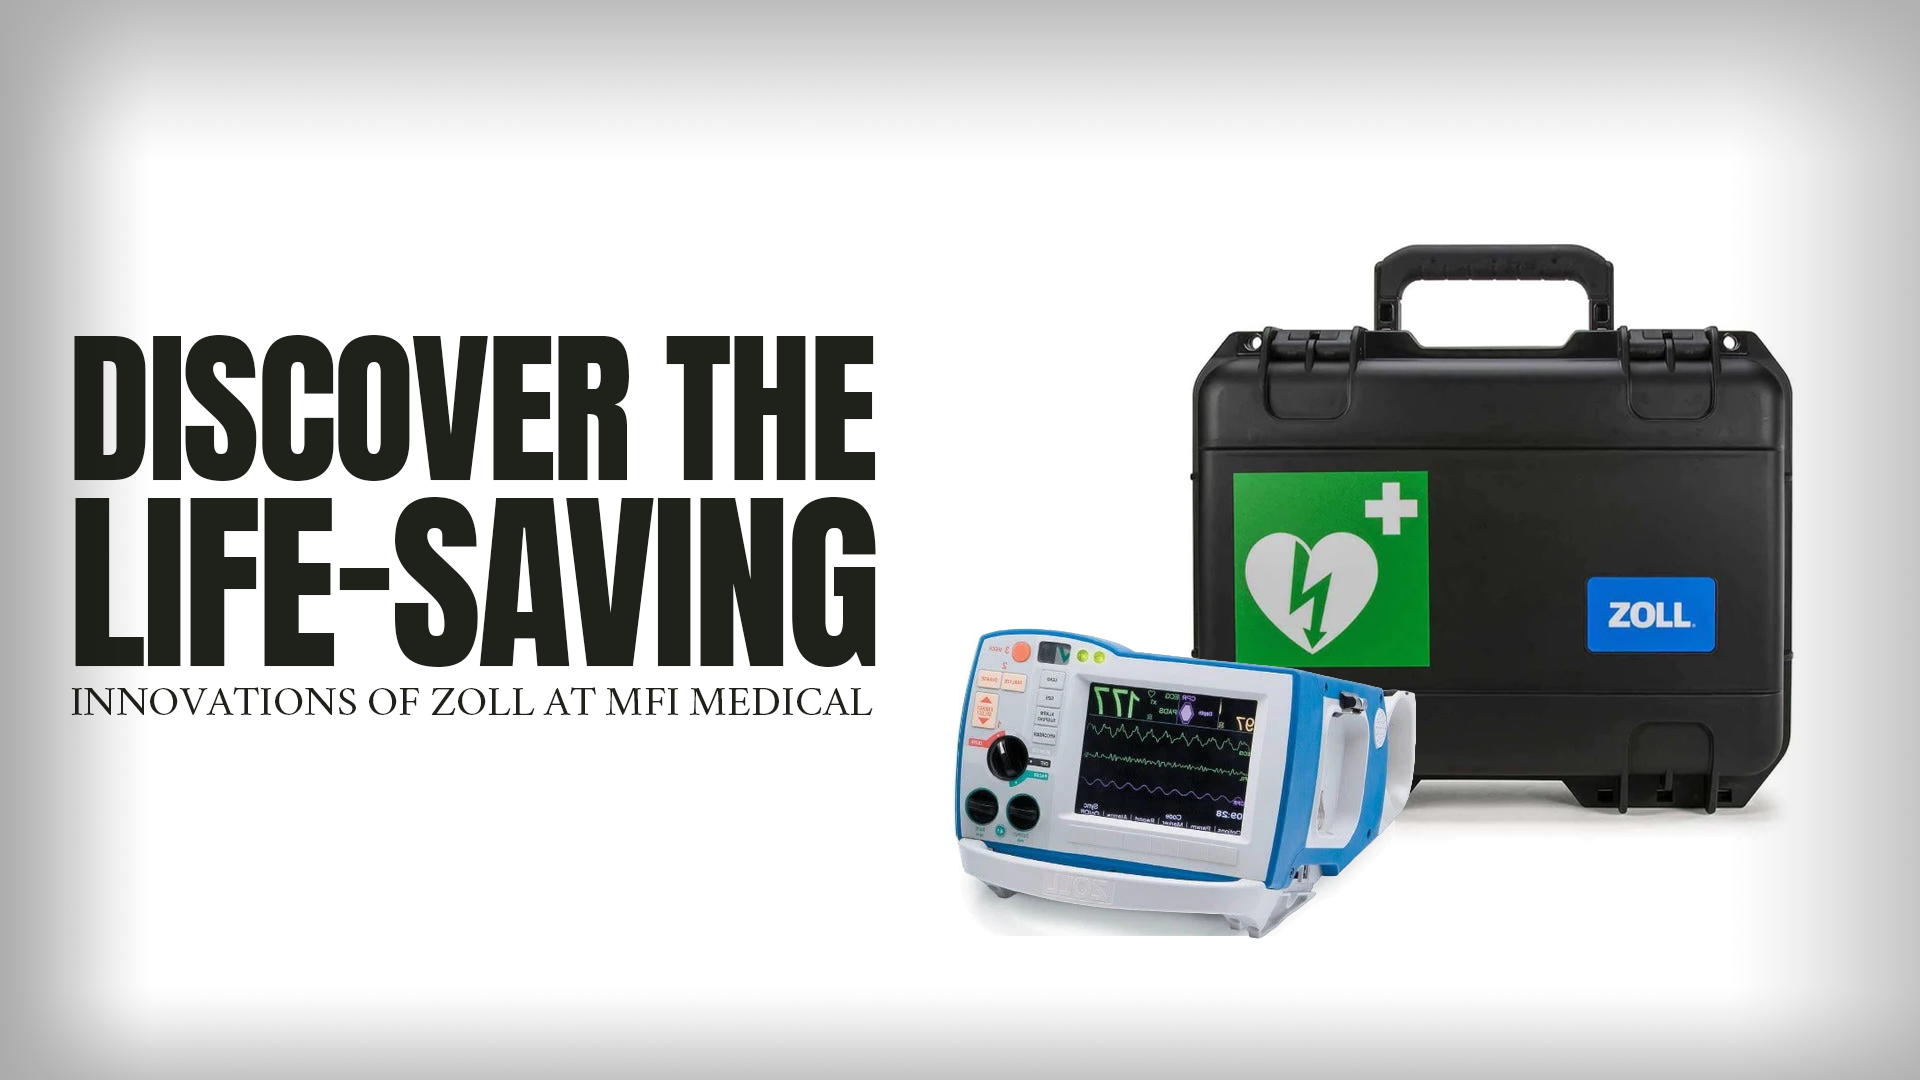 Discover the Life-Saving Innovations of Zoll at MFI Medical